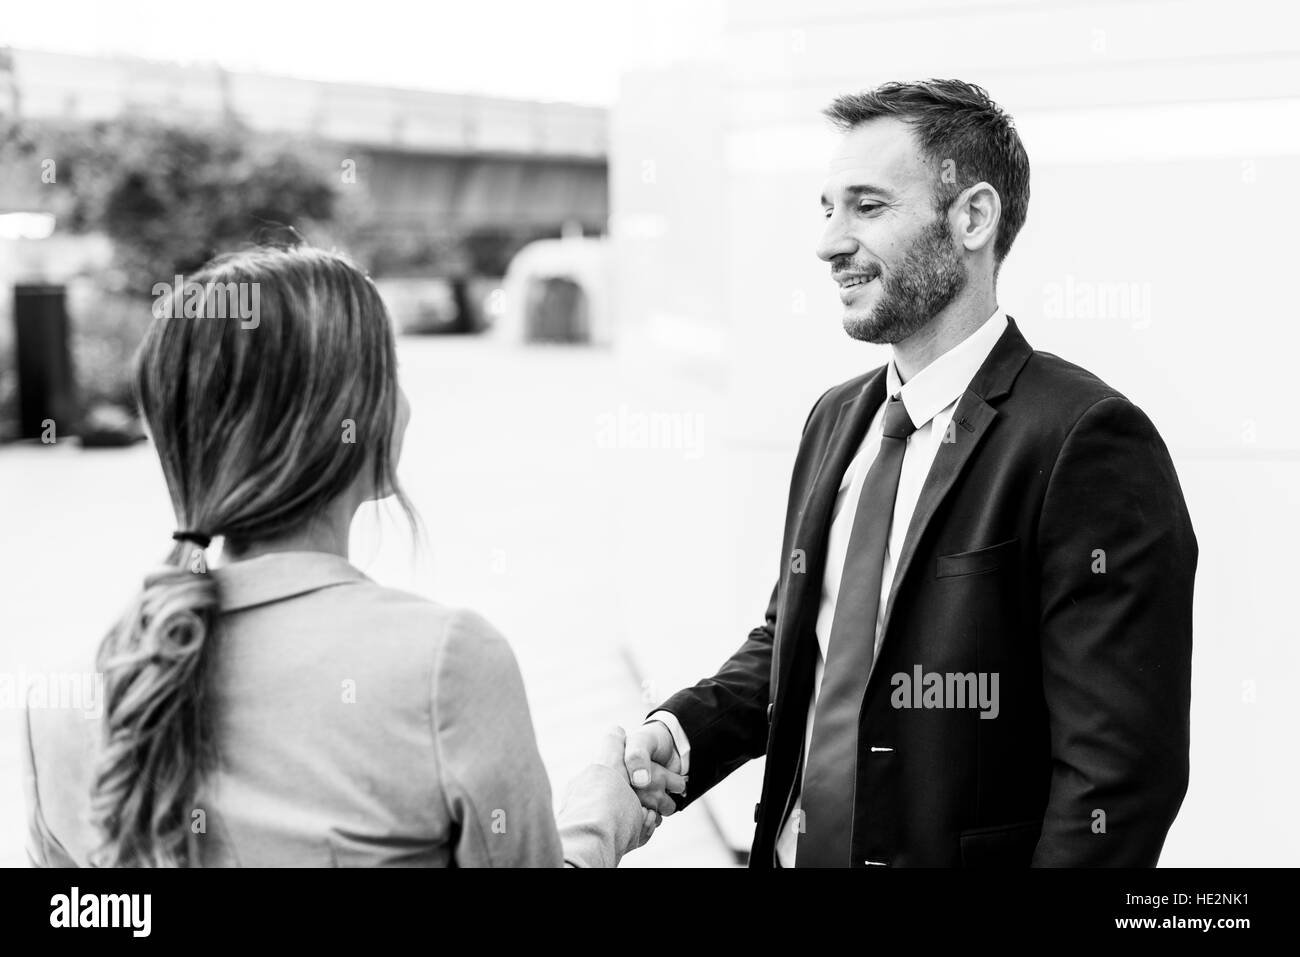 Handshake Greeting Corporate Business People Concept Stock Photo